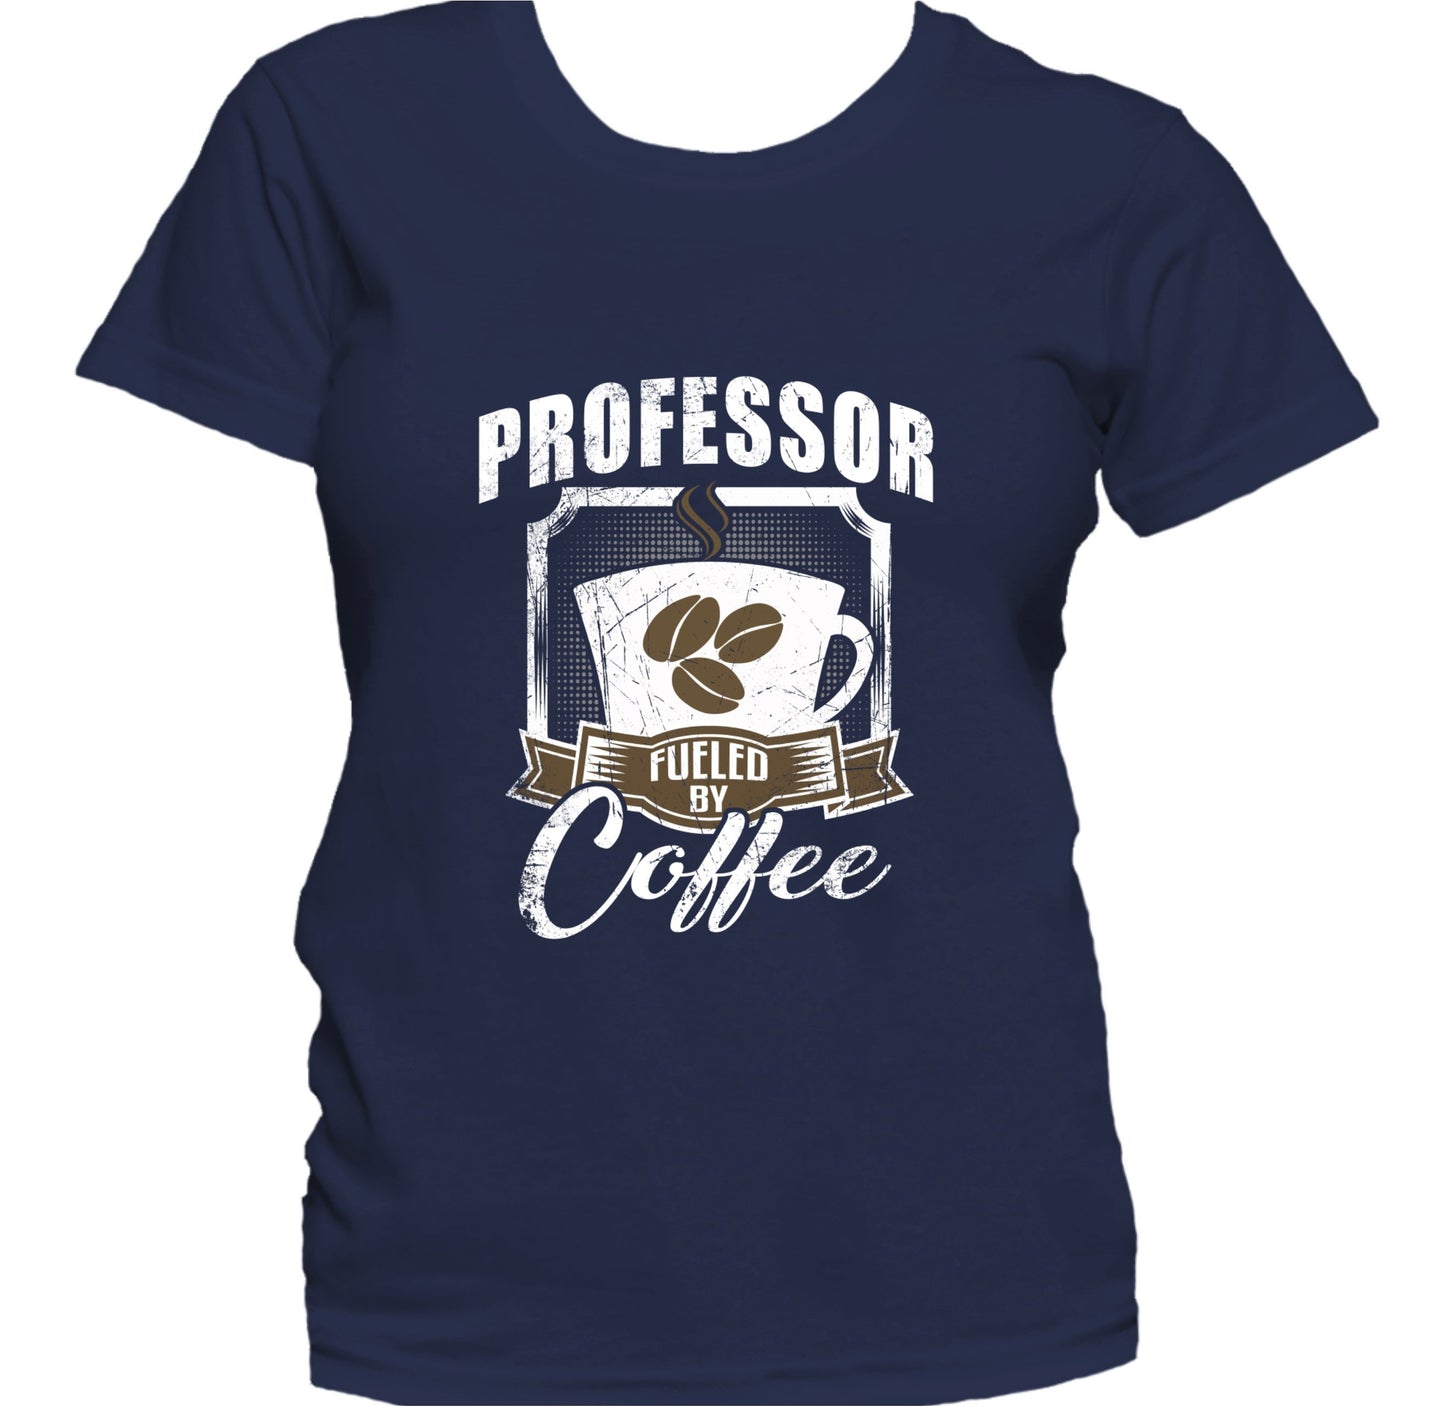 Professor Fueled By Coffee Funny Women's T-Shirt